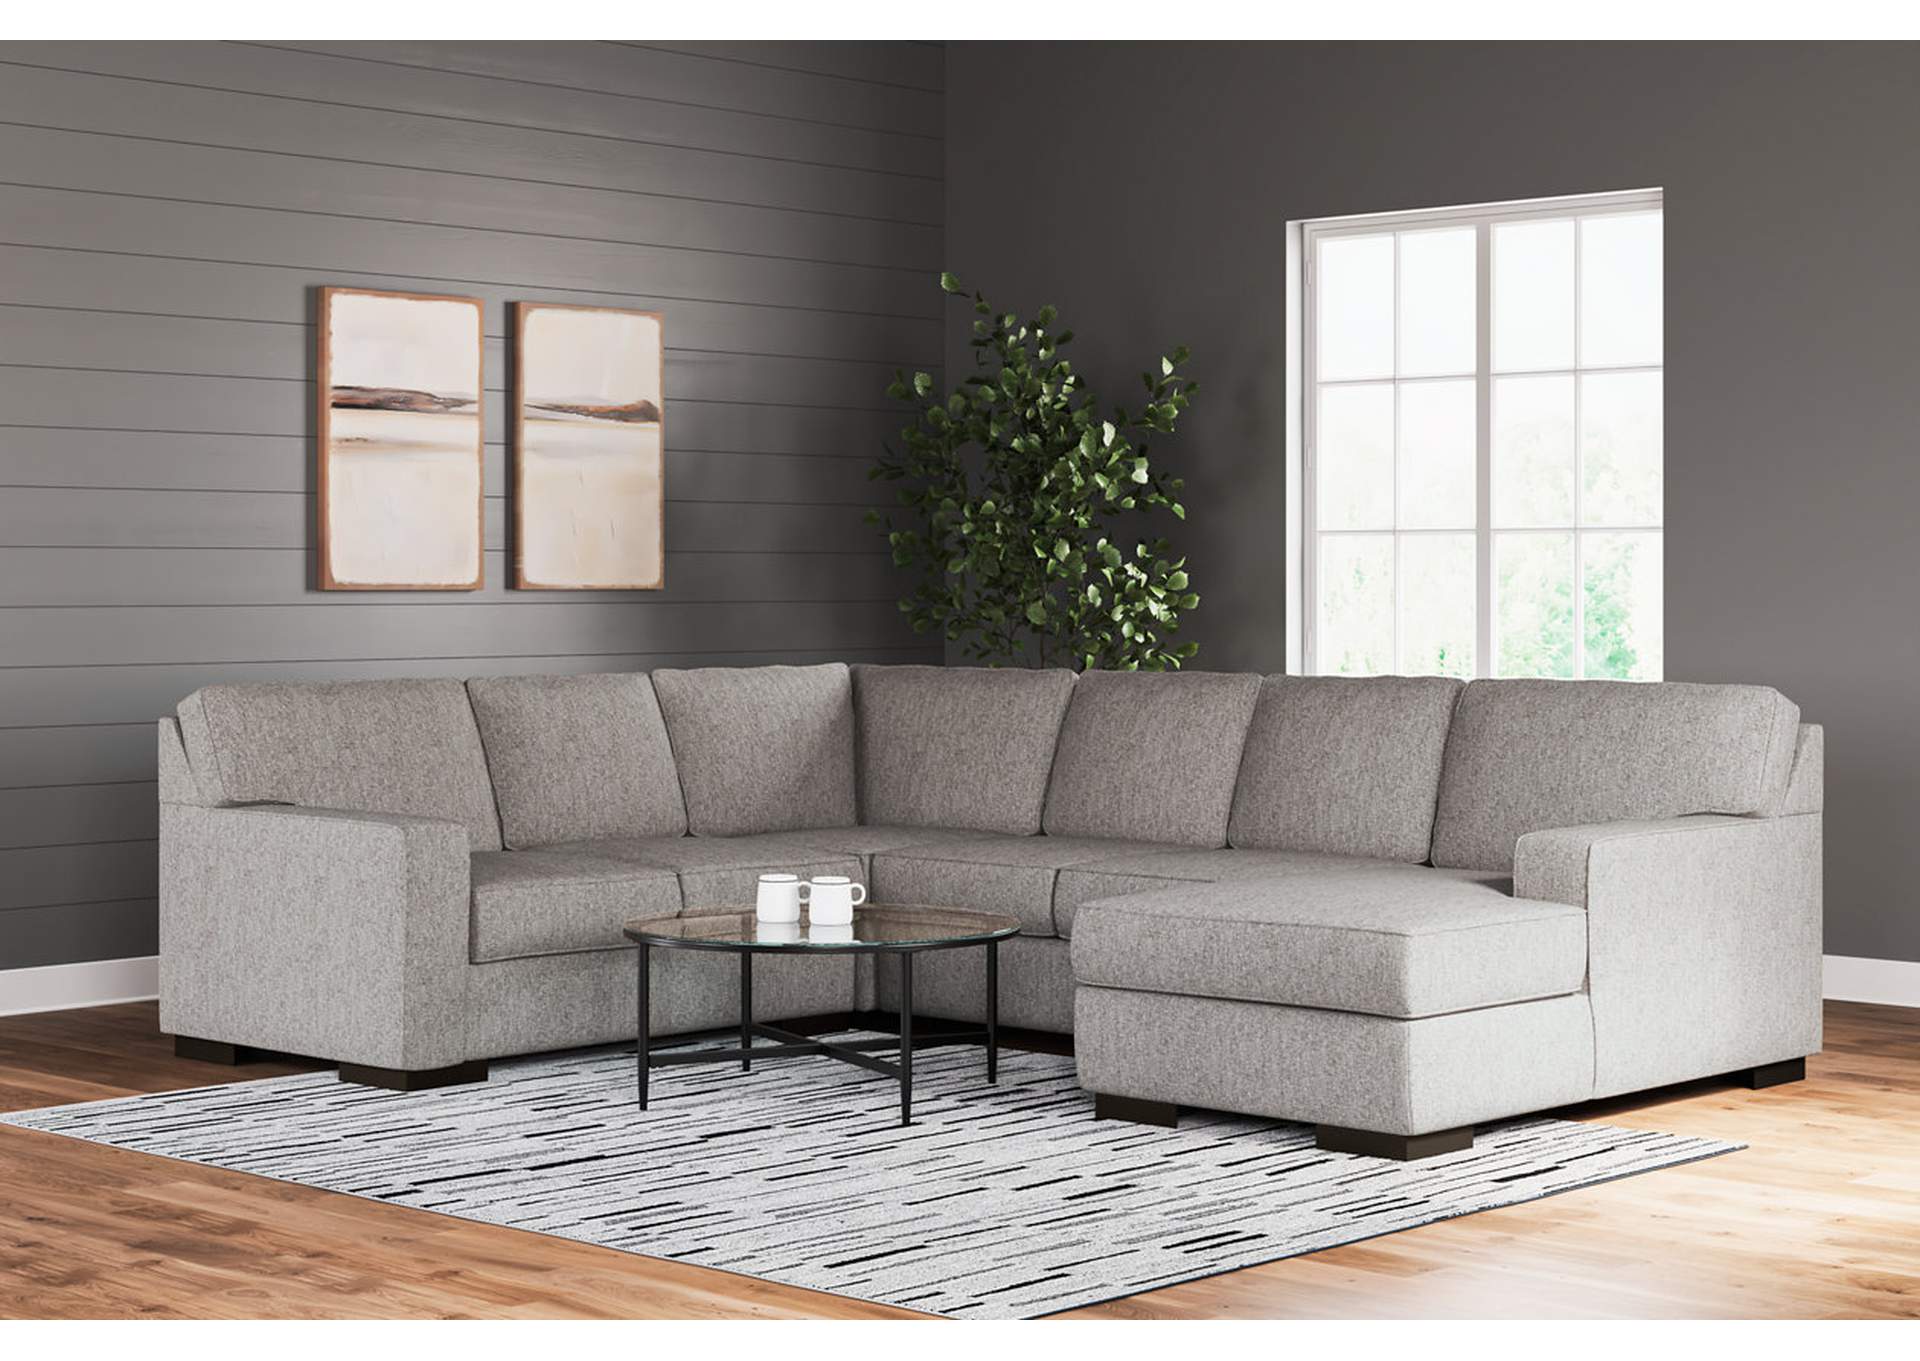 Ashlor Nuvella® 4-Piece Sectional with Chaise,Ashley